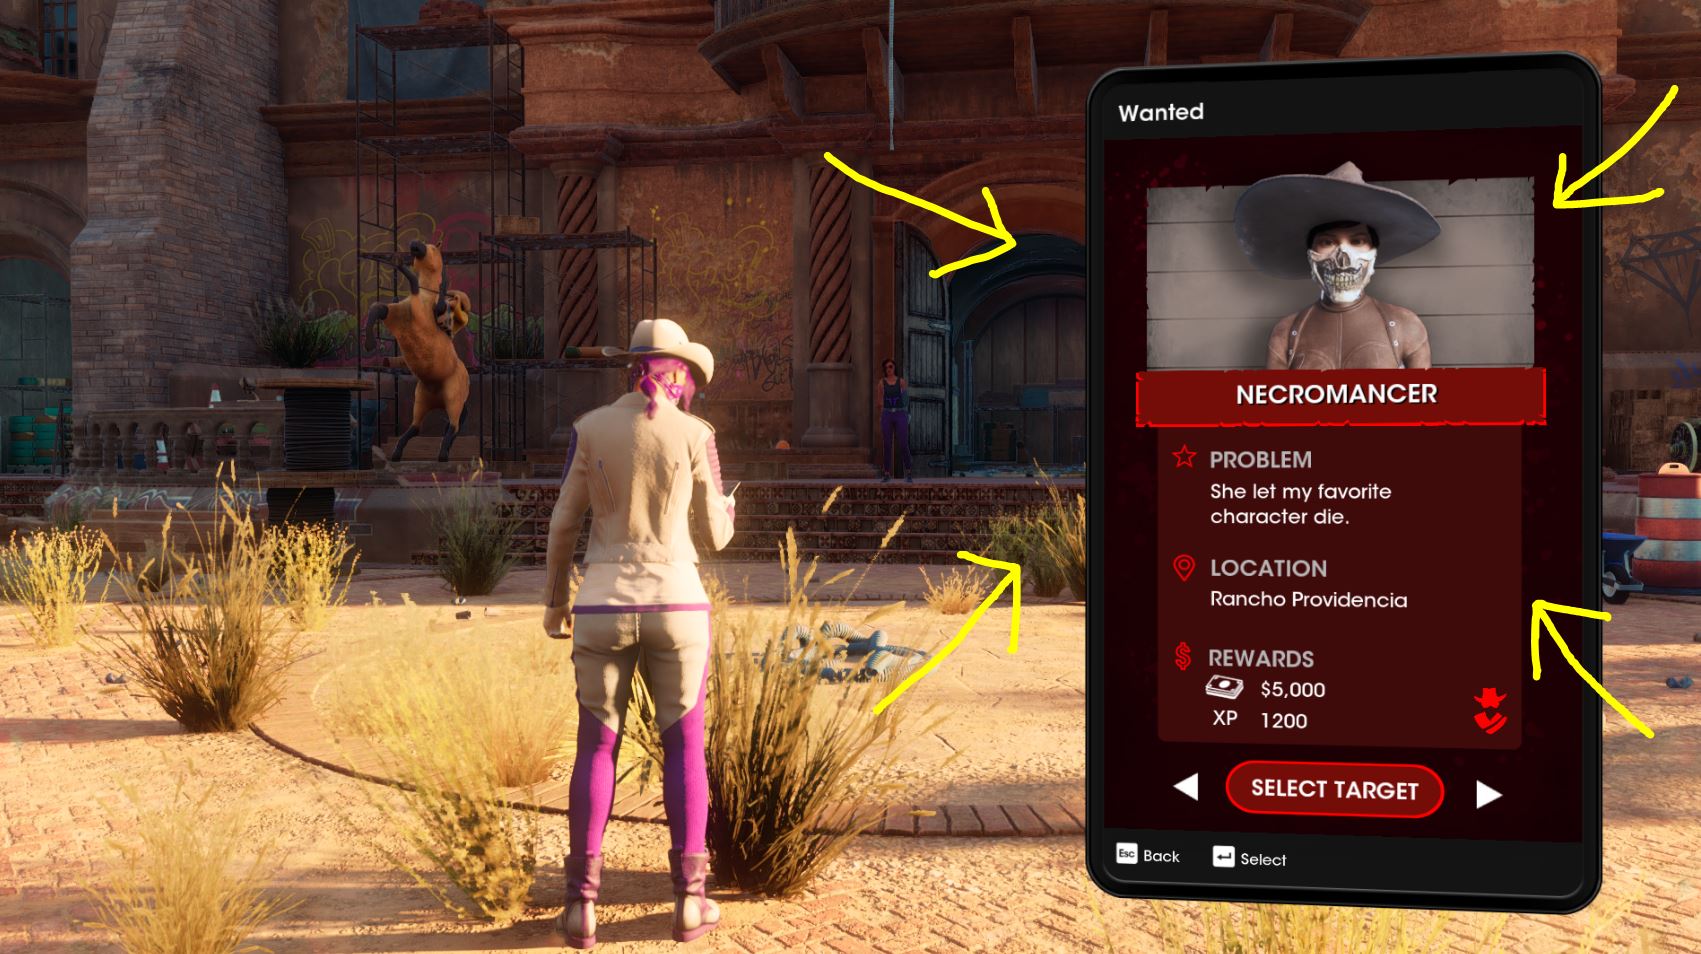 Saints Row Wanted App on Phone missions bounties